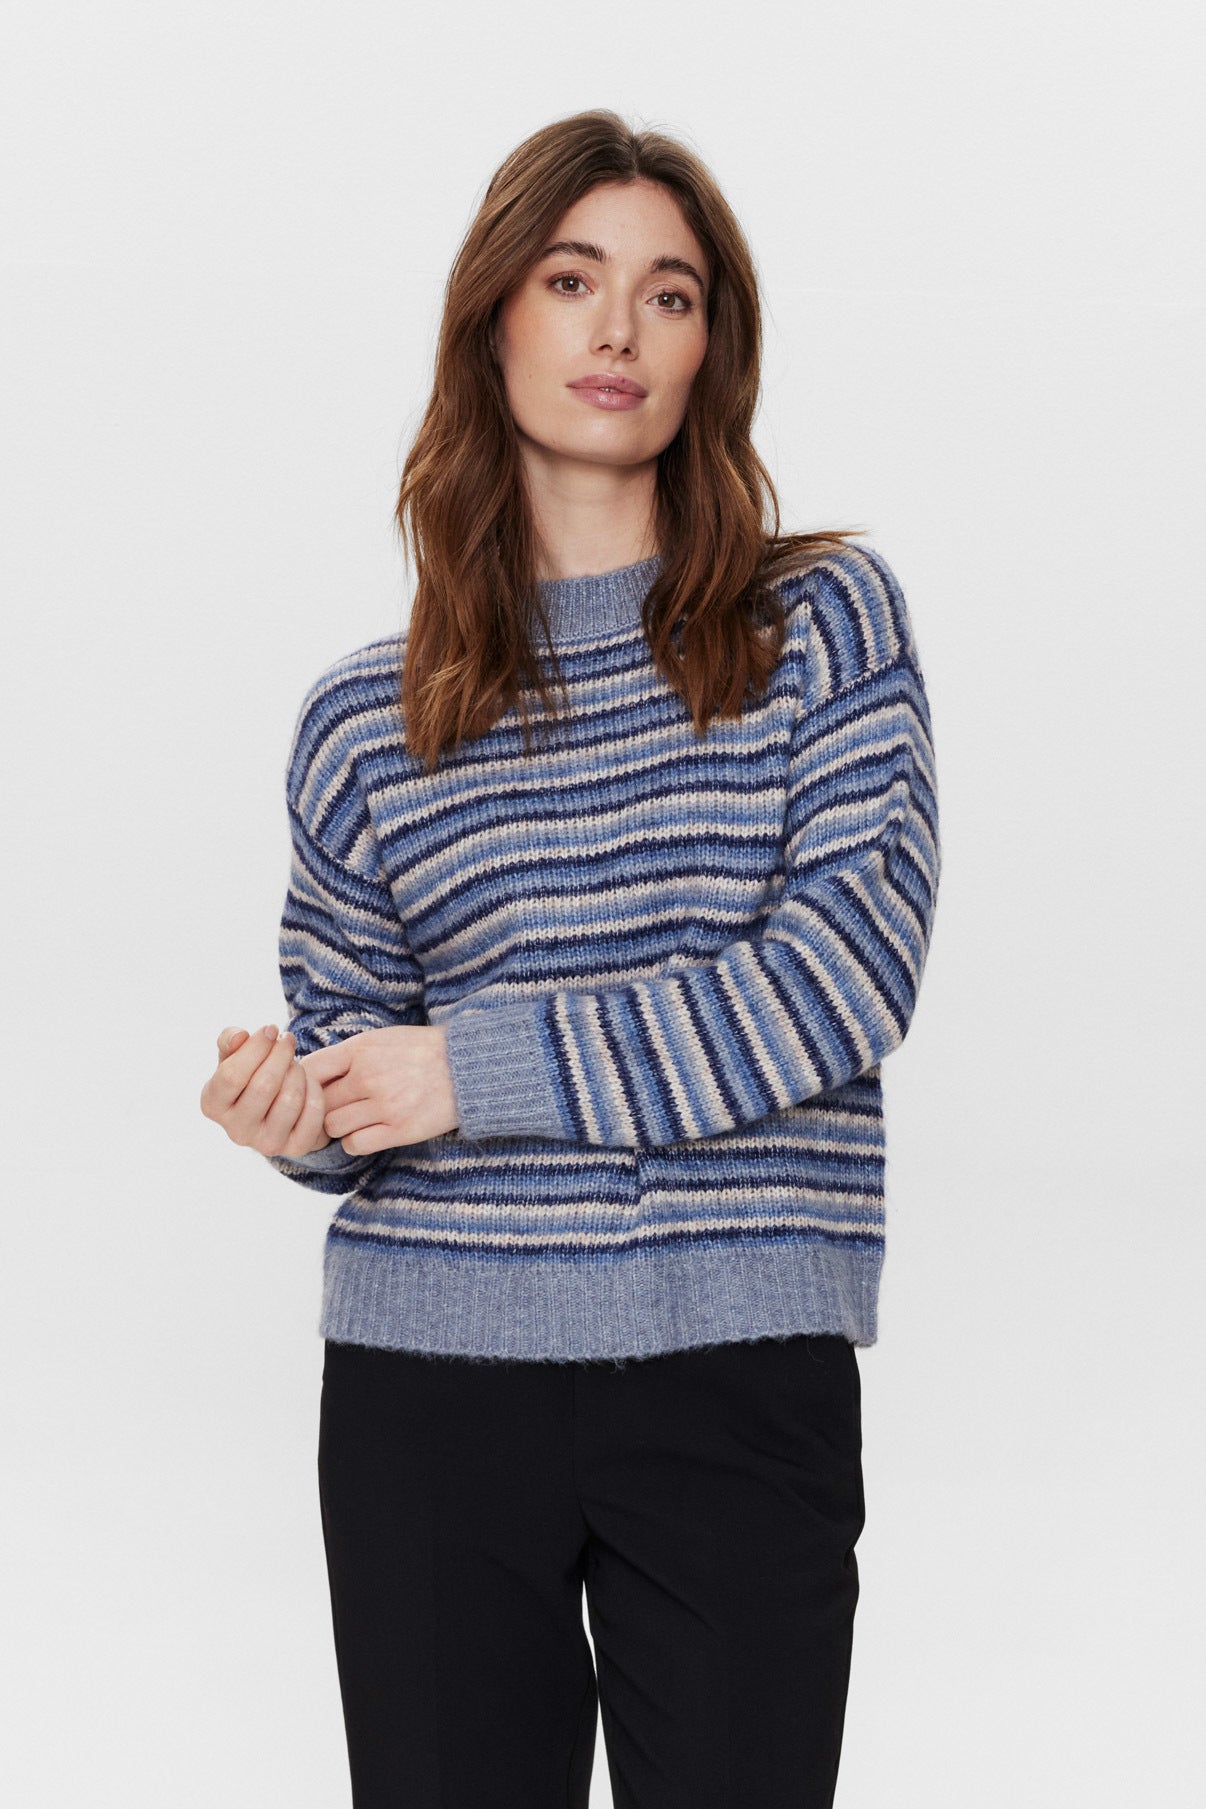 THERESE Knit Elise 9805